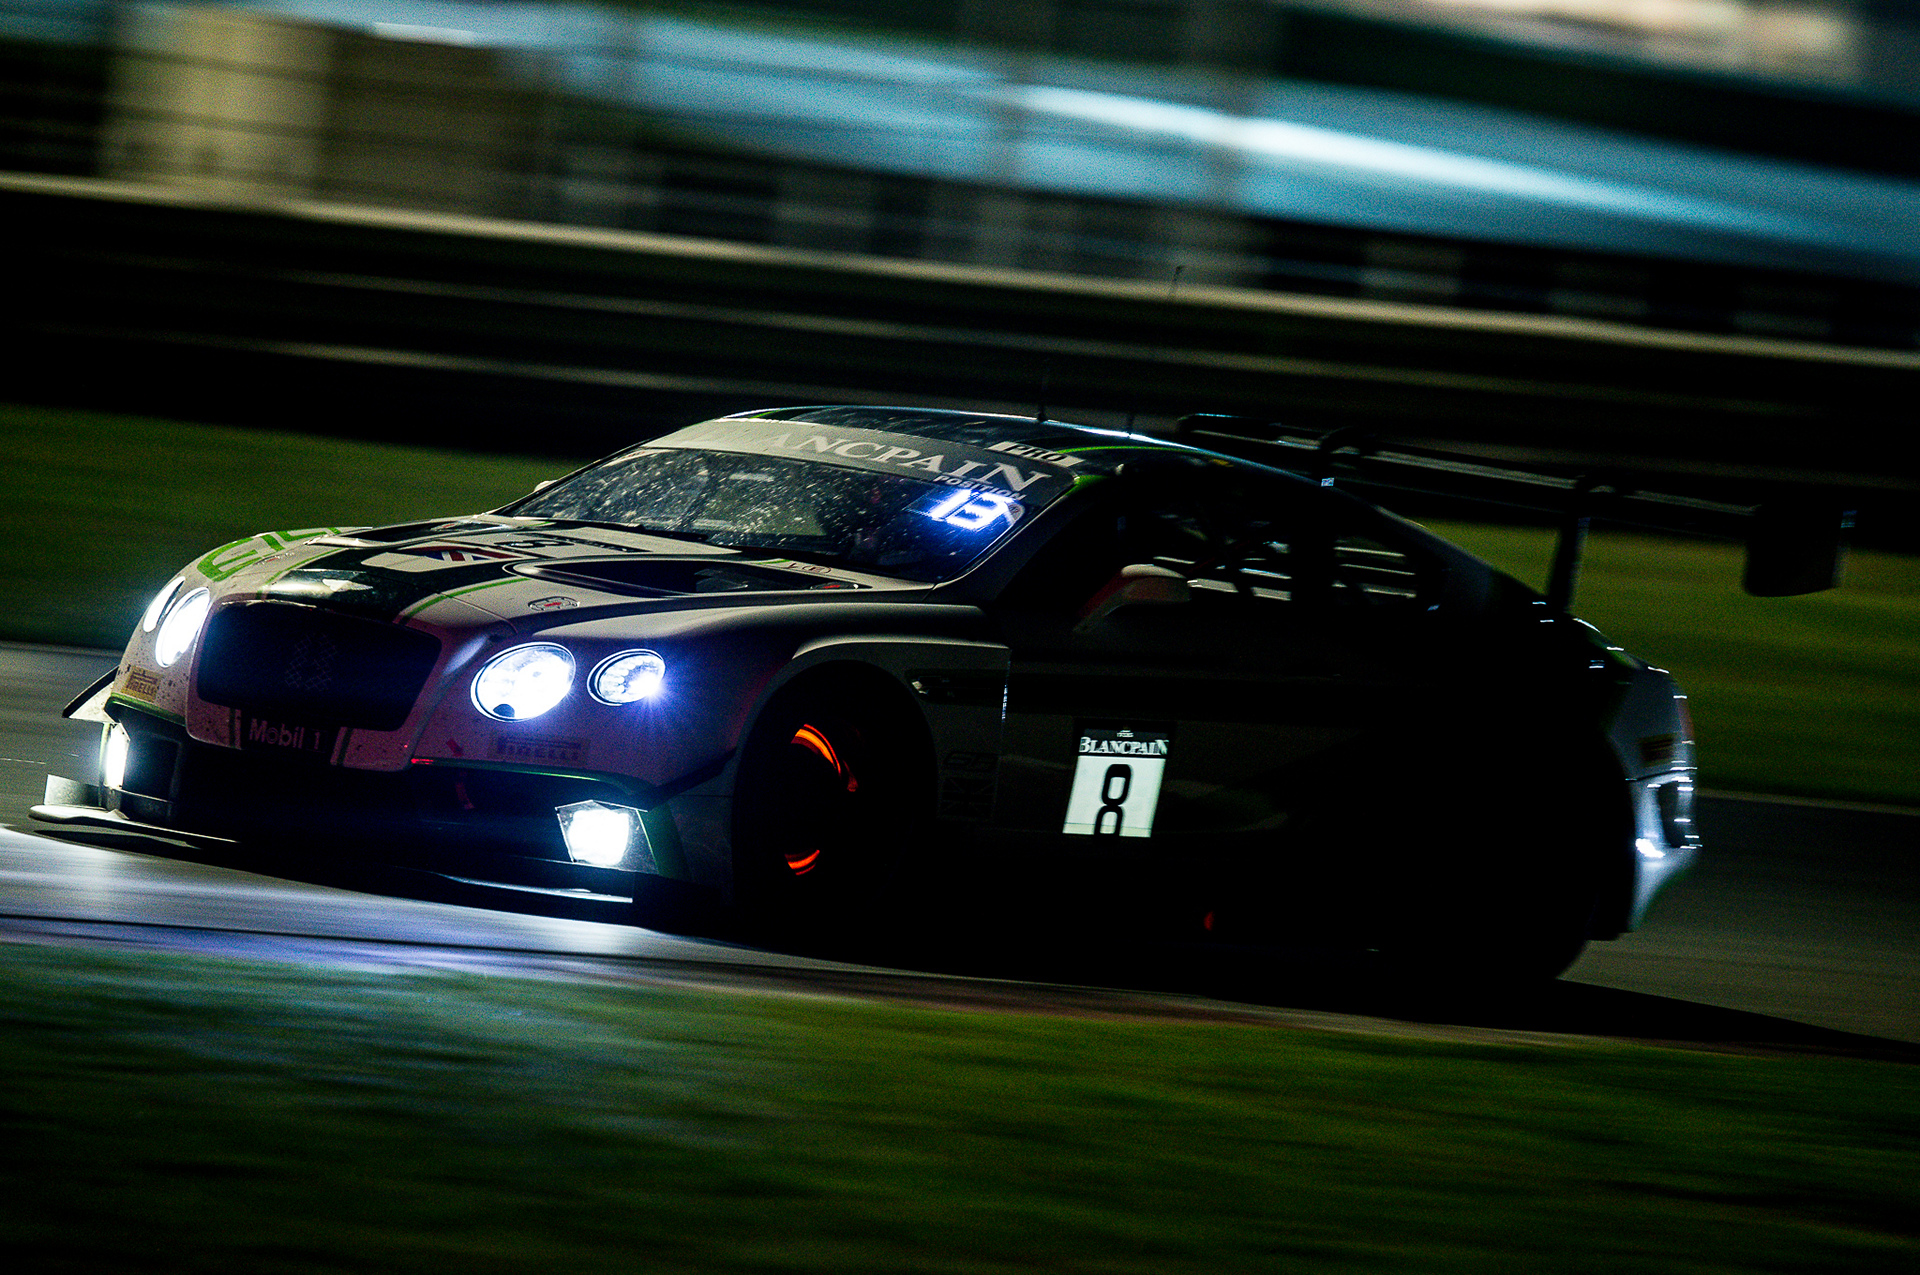 The no. 8 Continental GT3 in the night race © Volkswagen AG